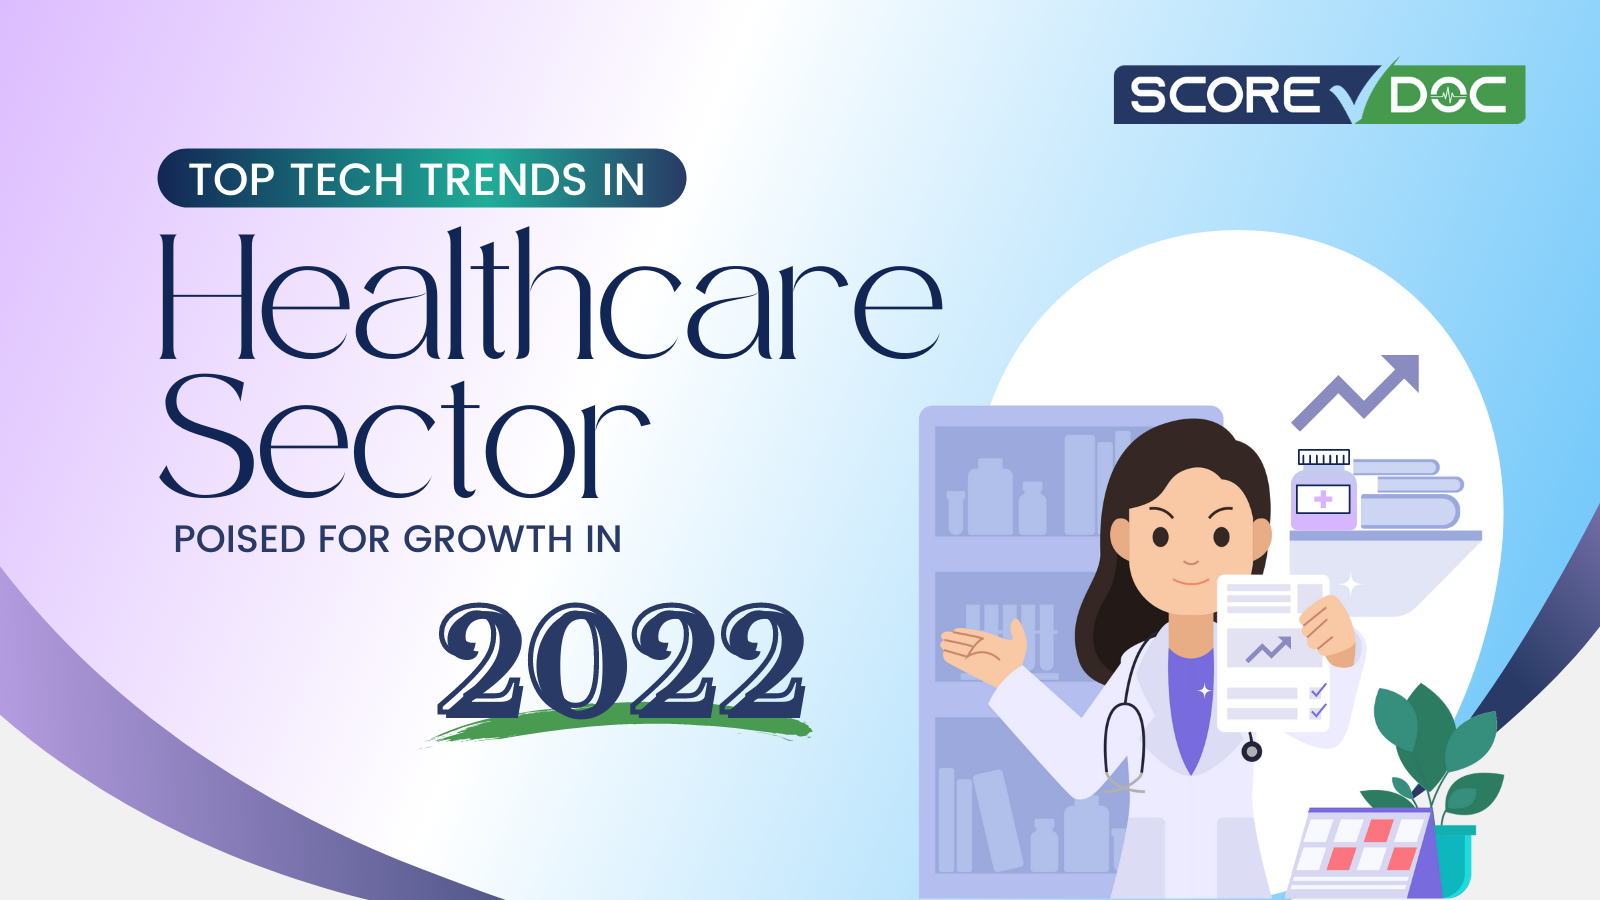 Top Tech Trends in Healthcare Sector Poised for Growth in 2022